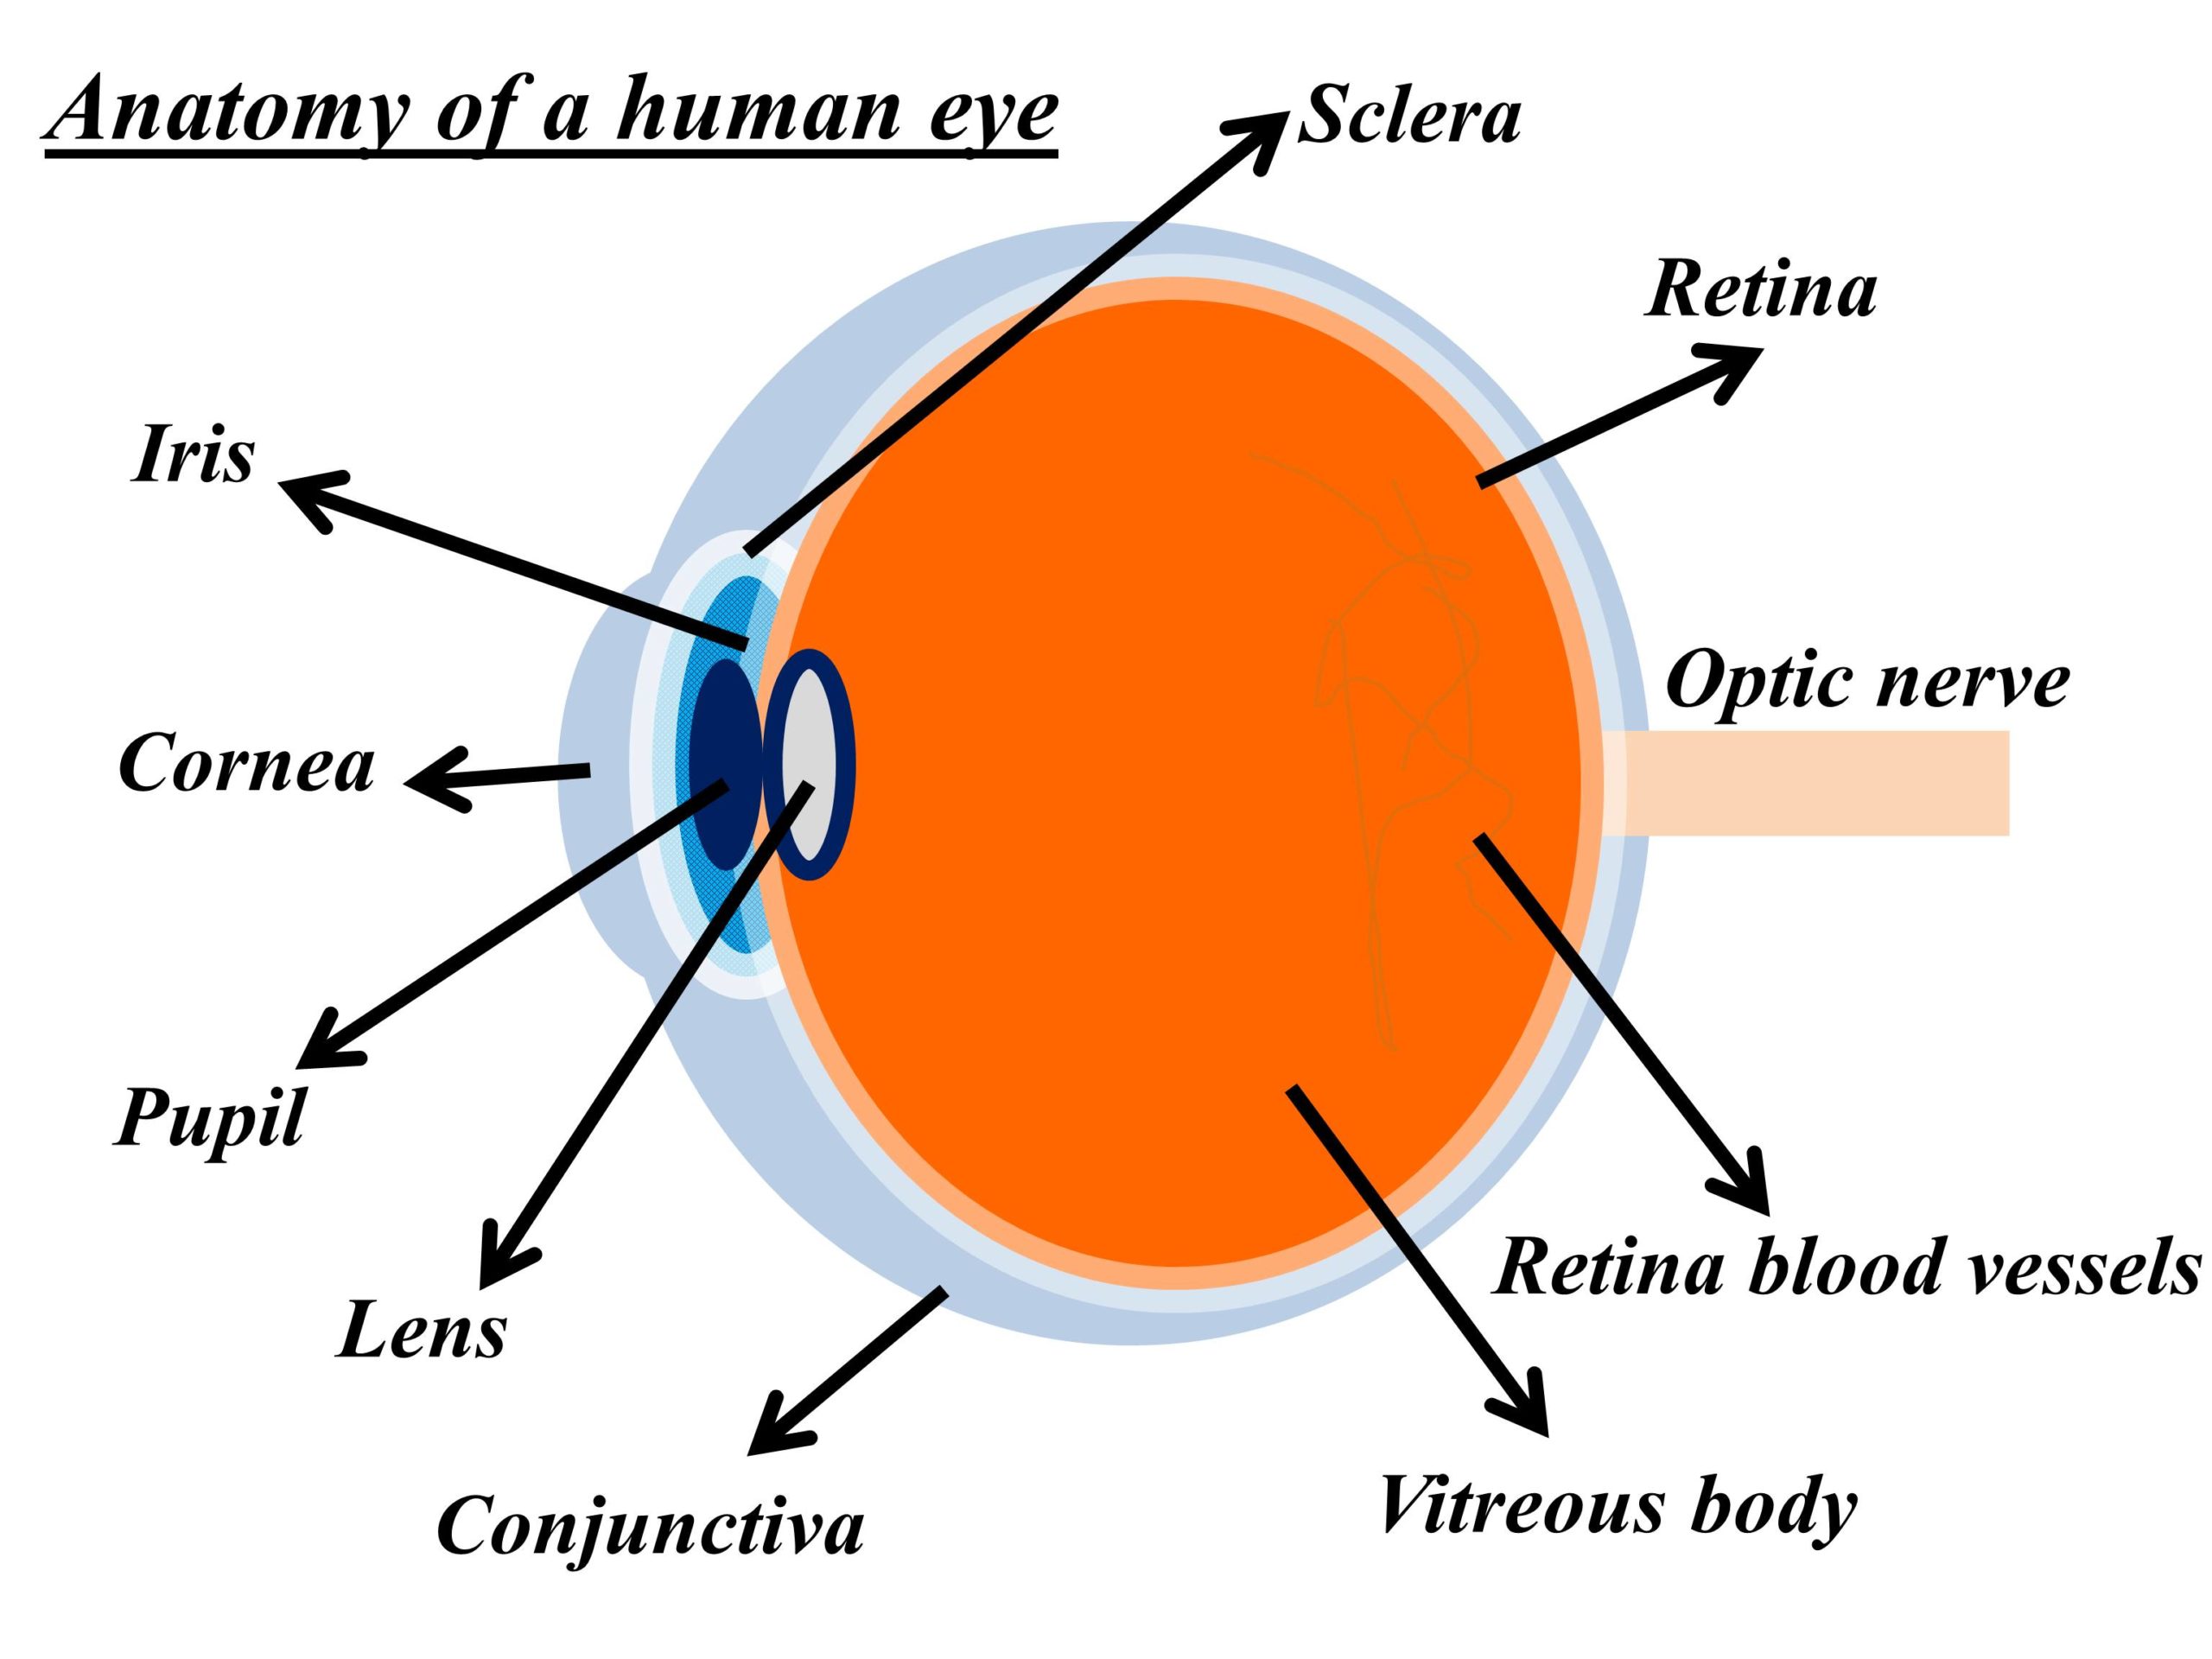 Human eye and its structure (Anatomy of a human eye).